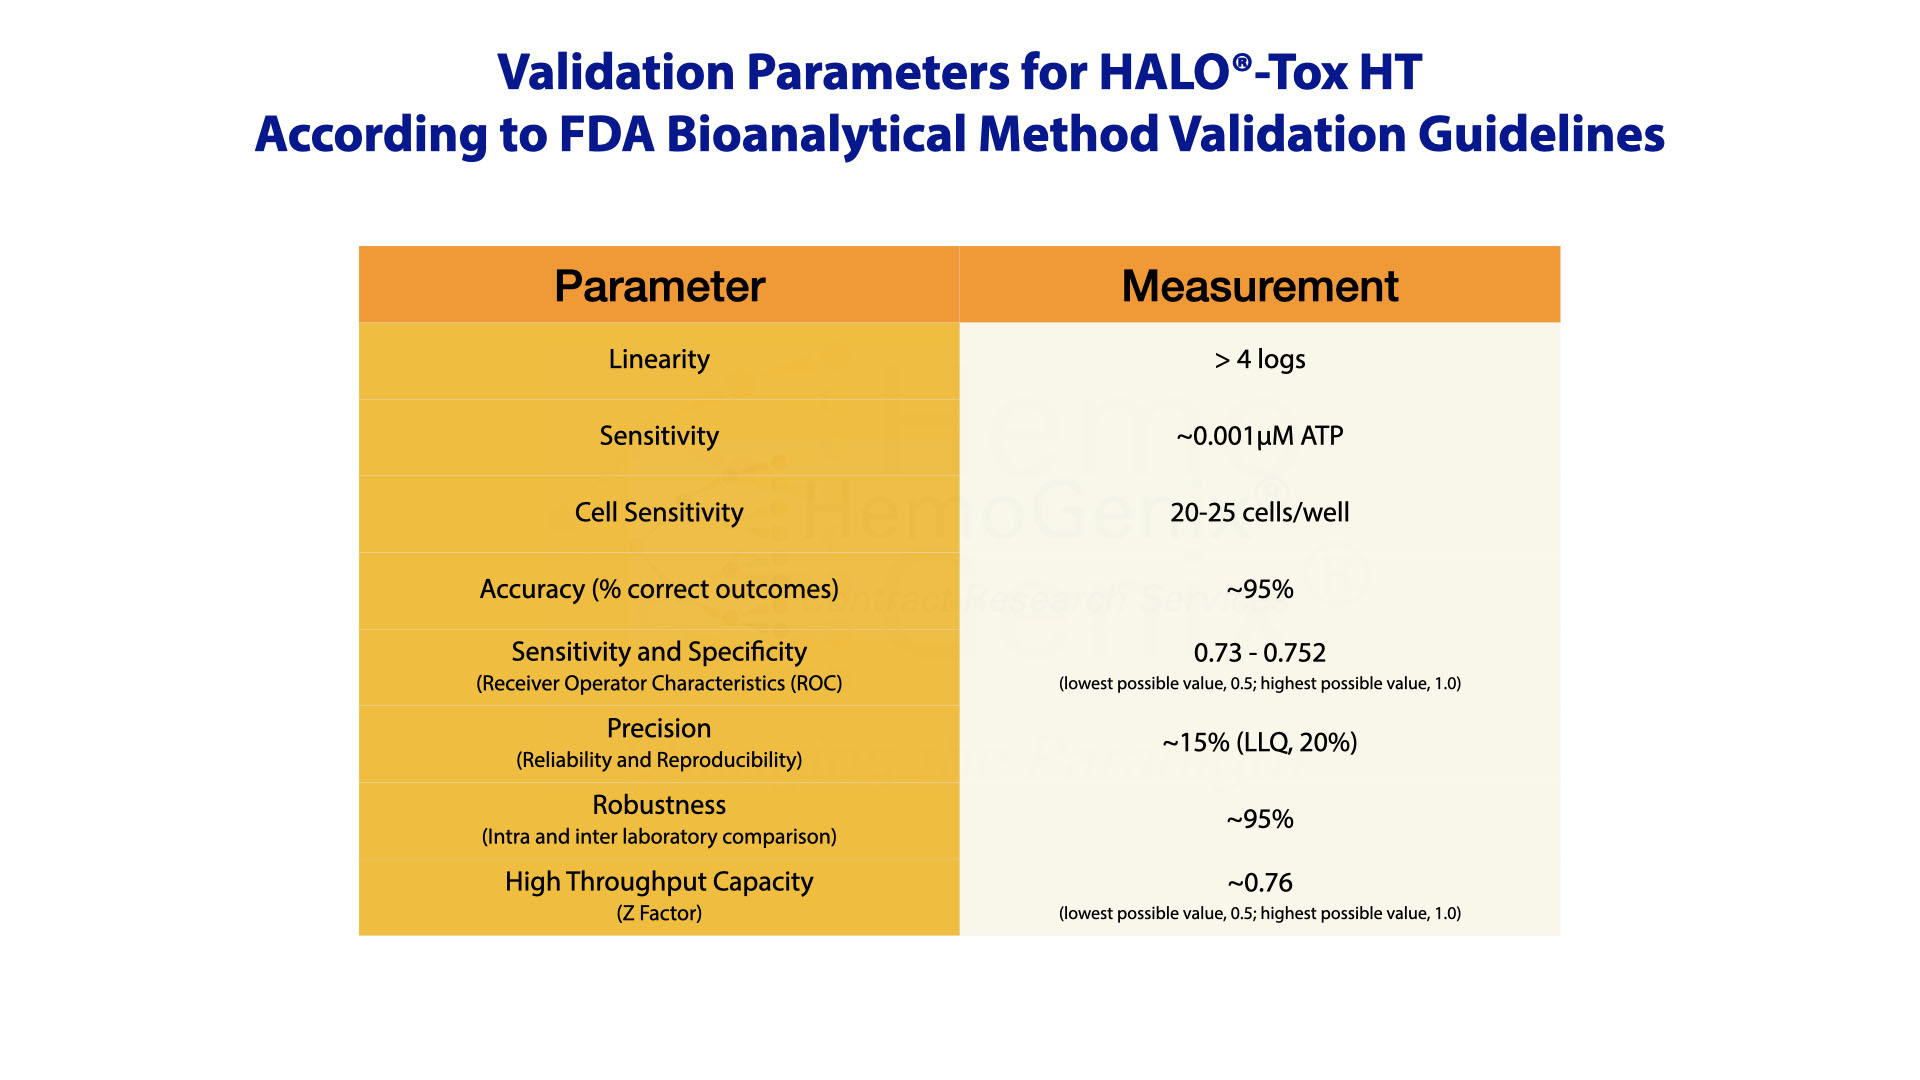 Validation Parameters for HALO-Tox HT